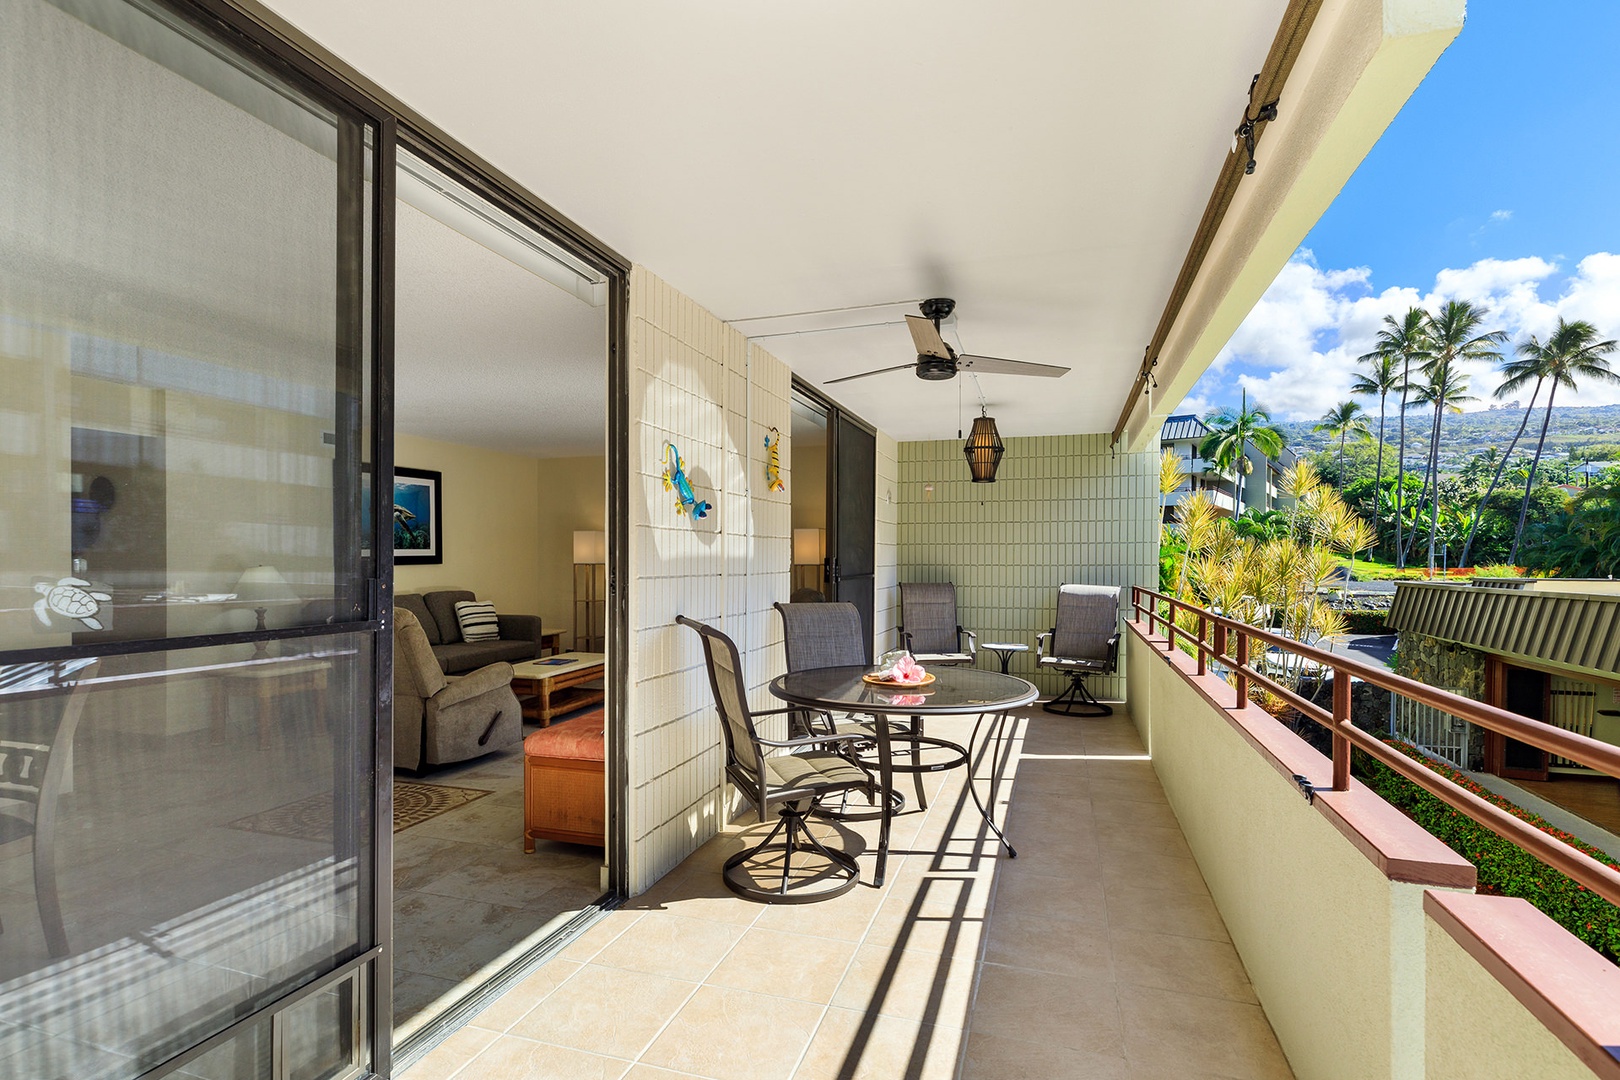 Lanai with outdoor seating